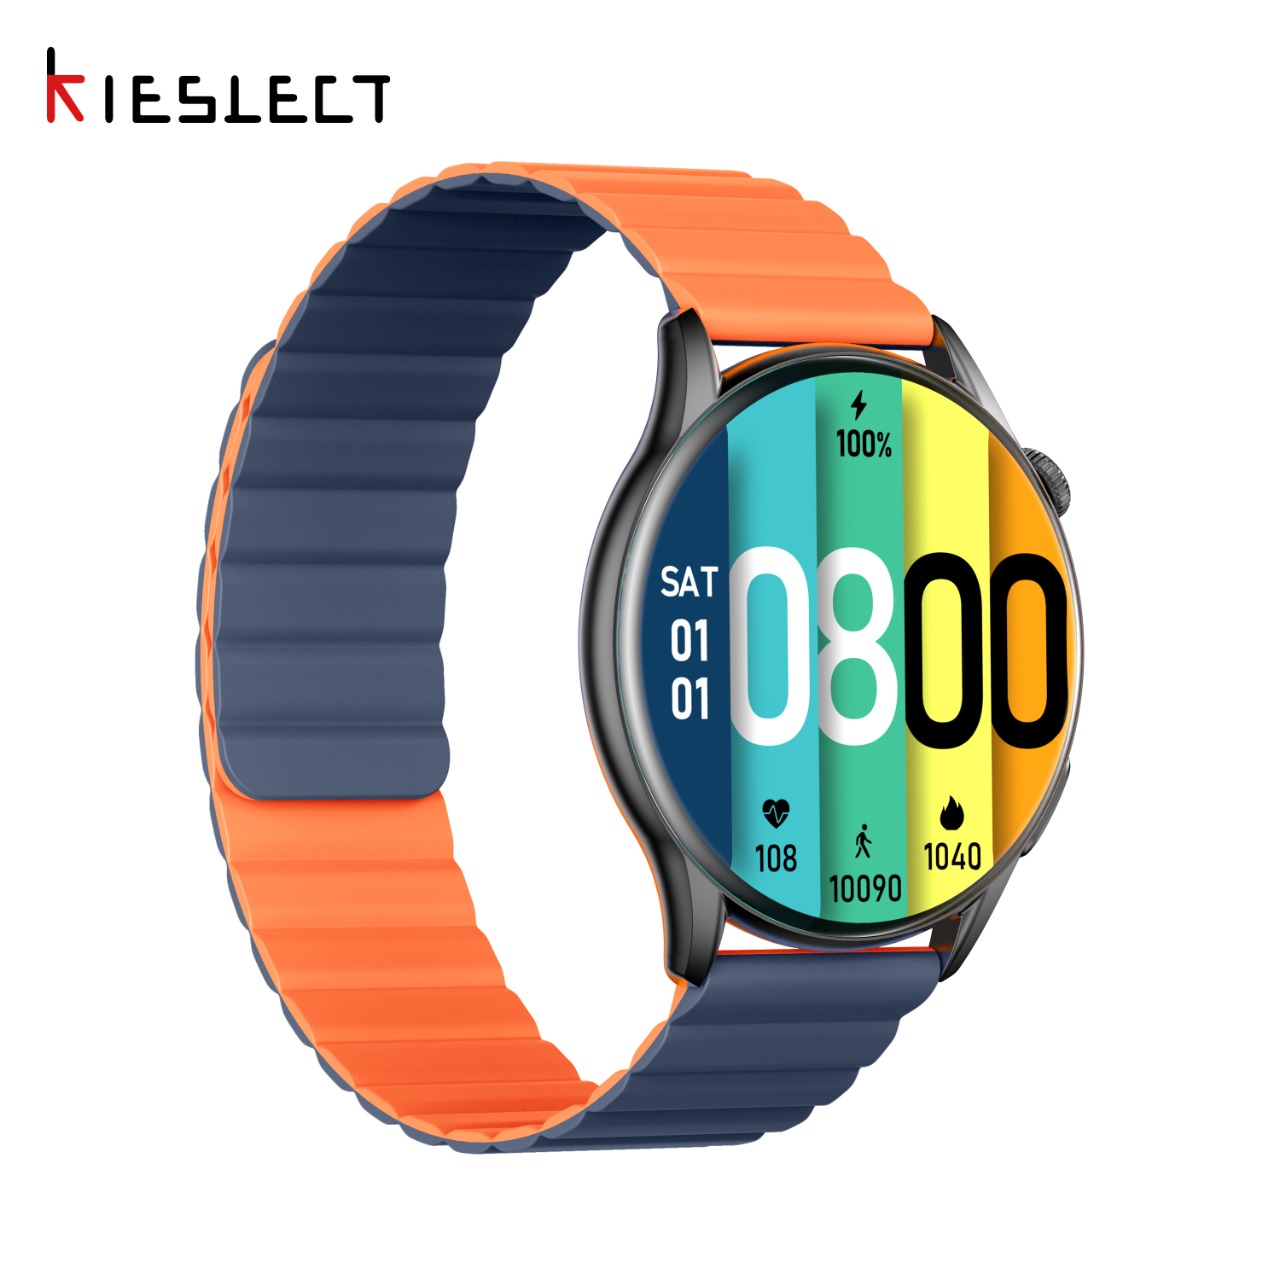 Kieslect Kr Pro SmartWatch With Bluetooth Calling & 1.43